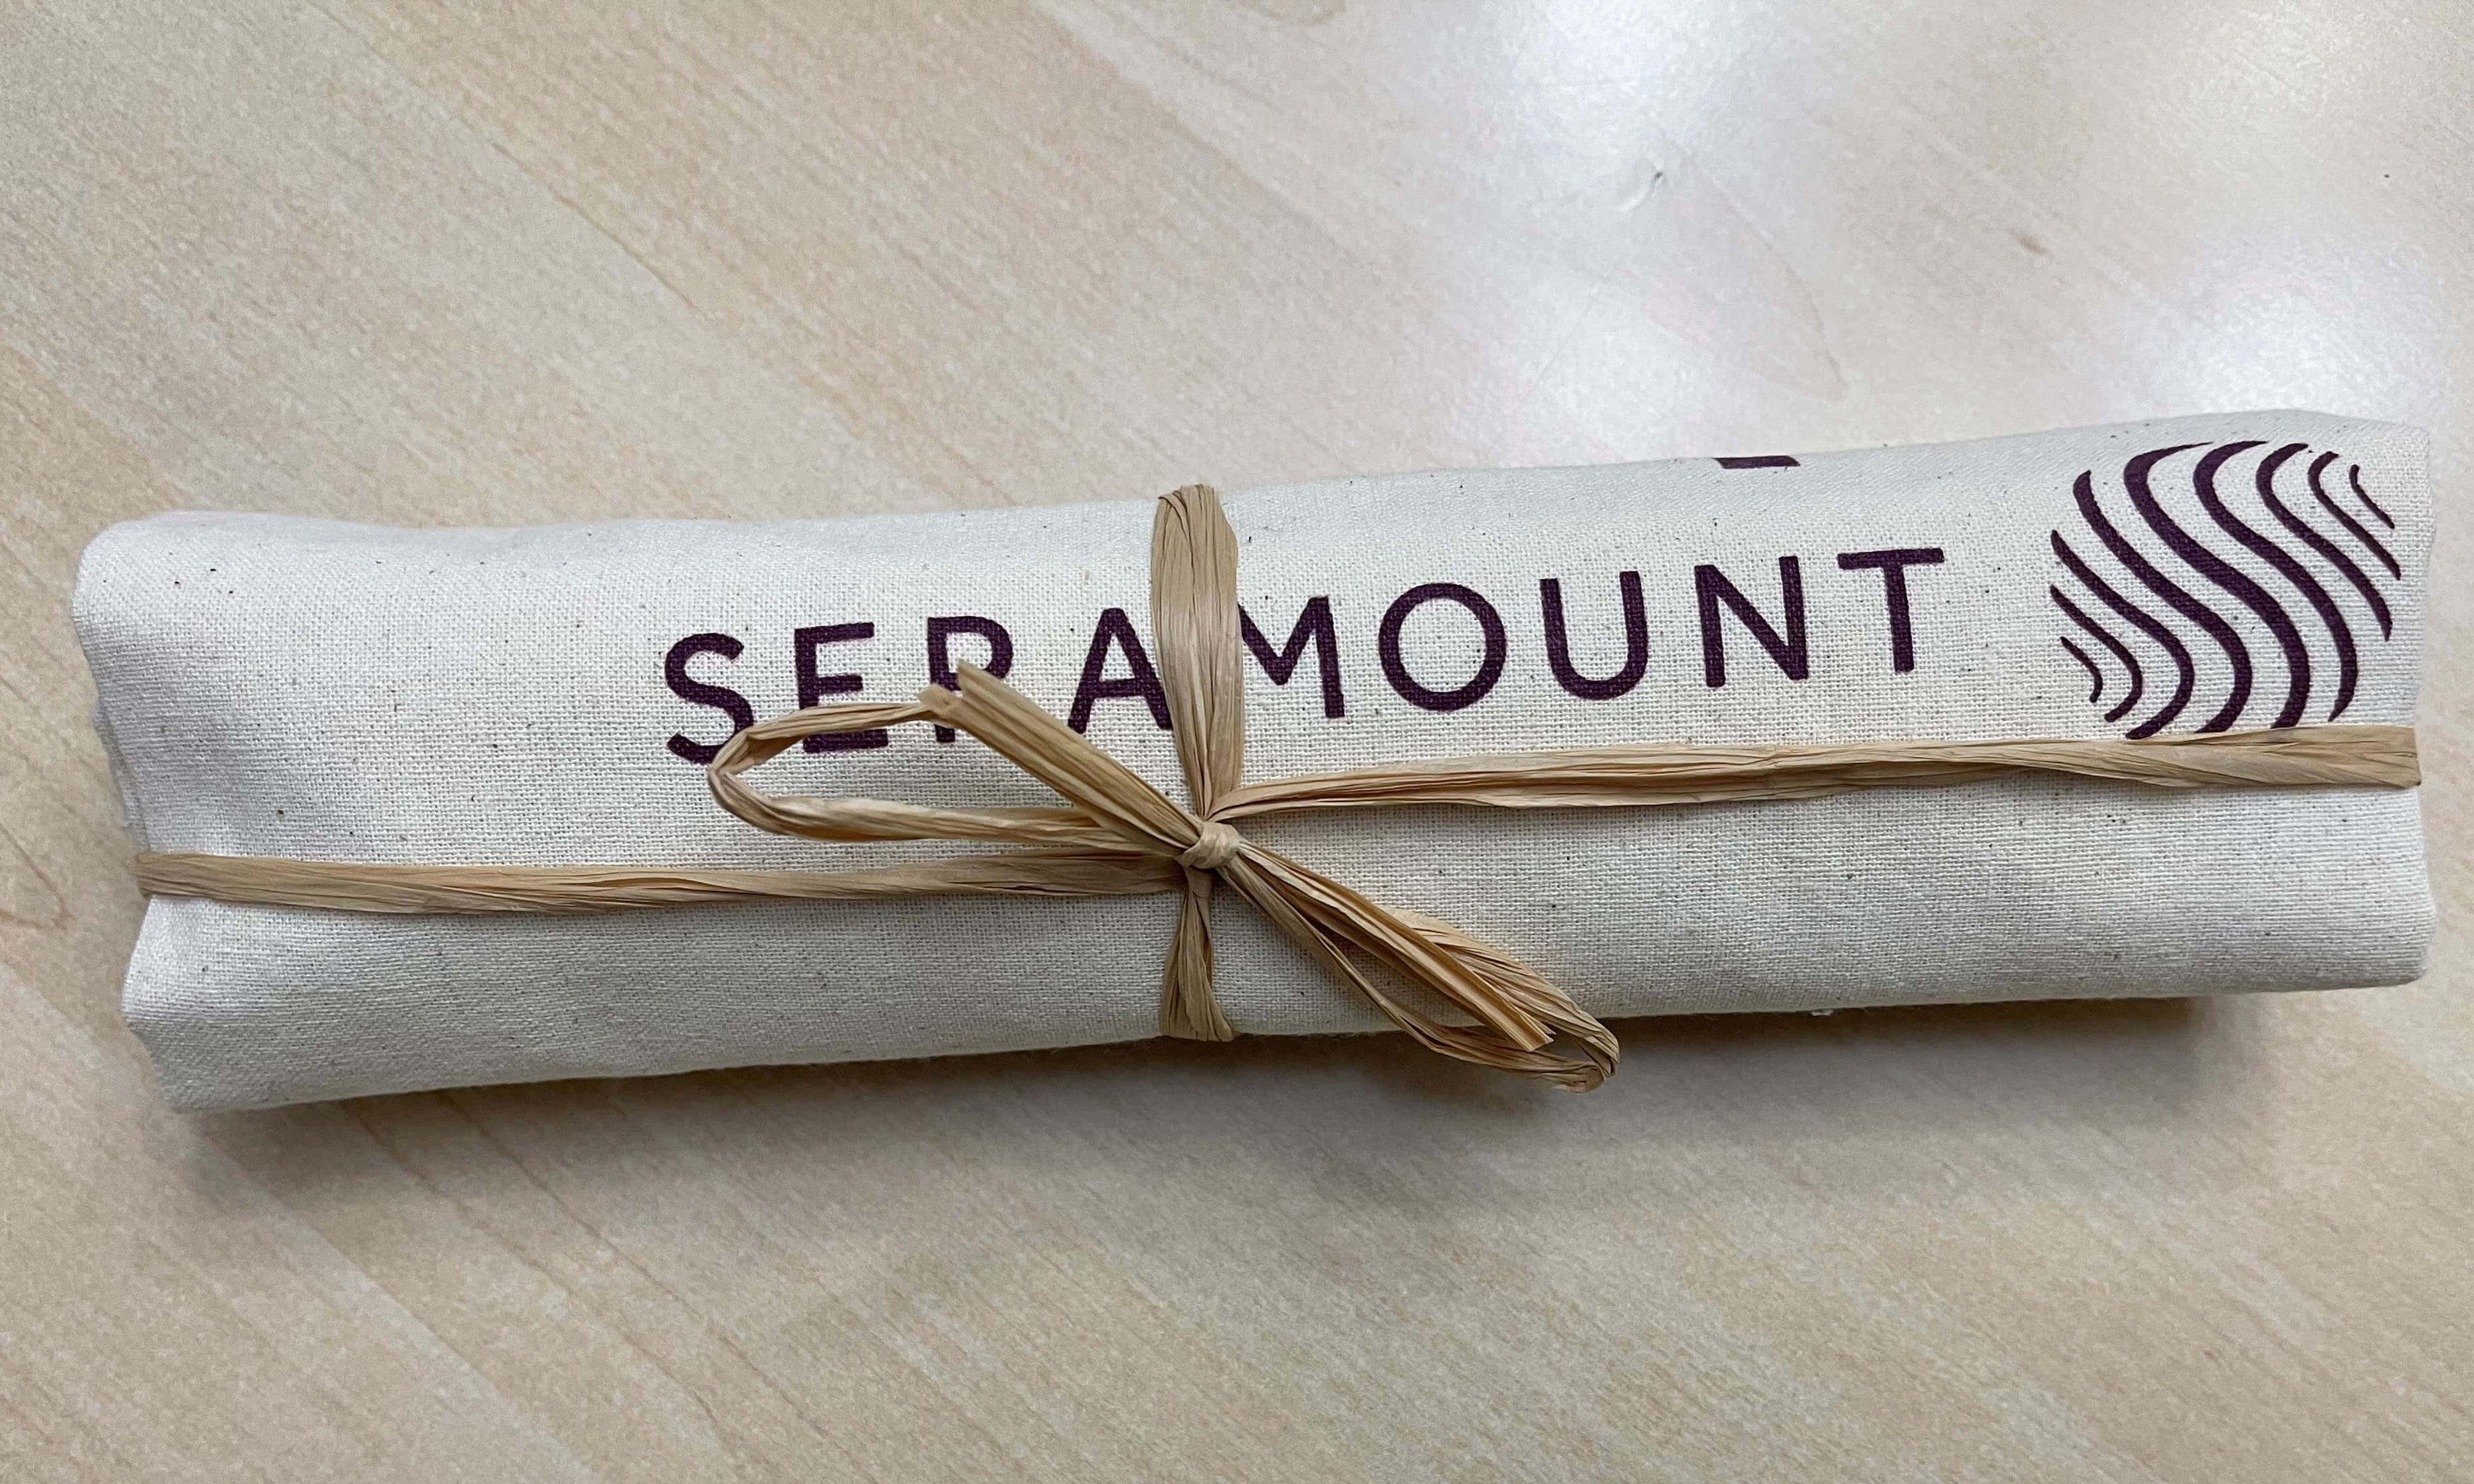 Dress up your presentation! This simple tote bag was mailed out to employees when Working Mother Media Group changed its name to Seramount.